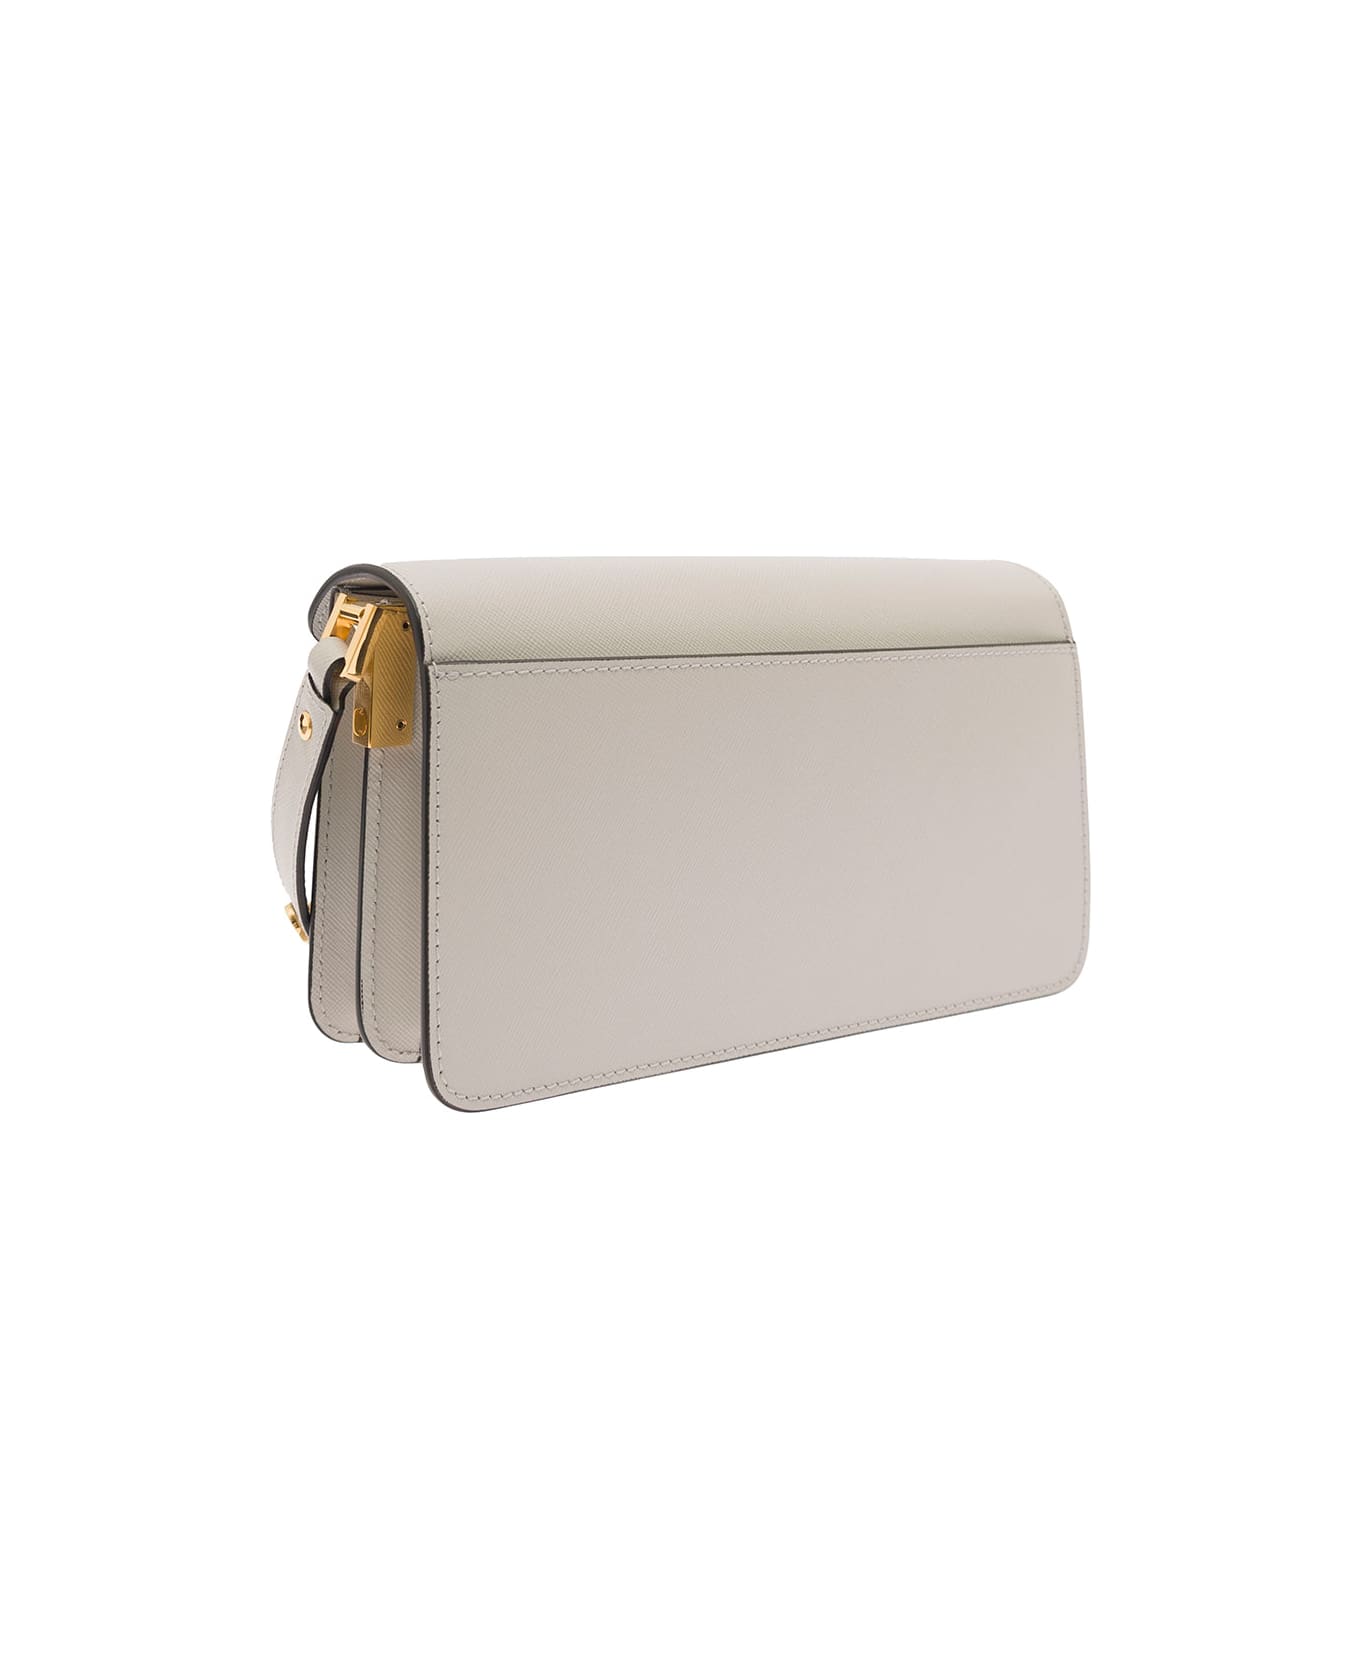 Marni 'trunk' White Shoulder Bag With Push-lock Fastening In Leather Woman - White ショルダーバッグ